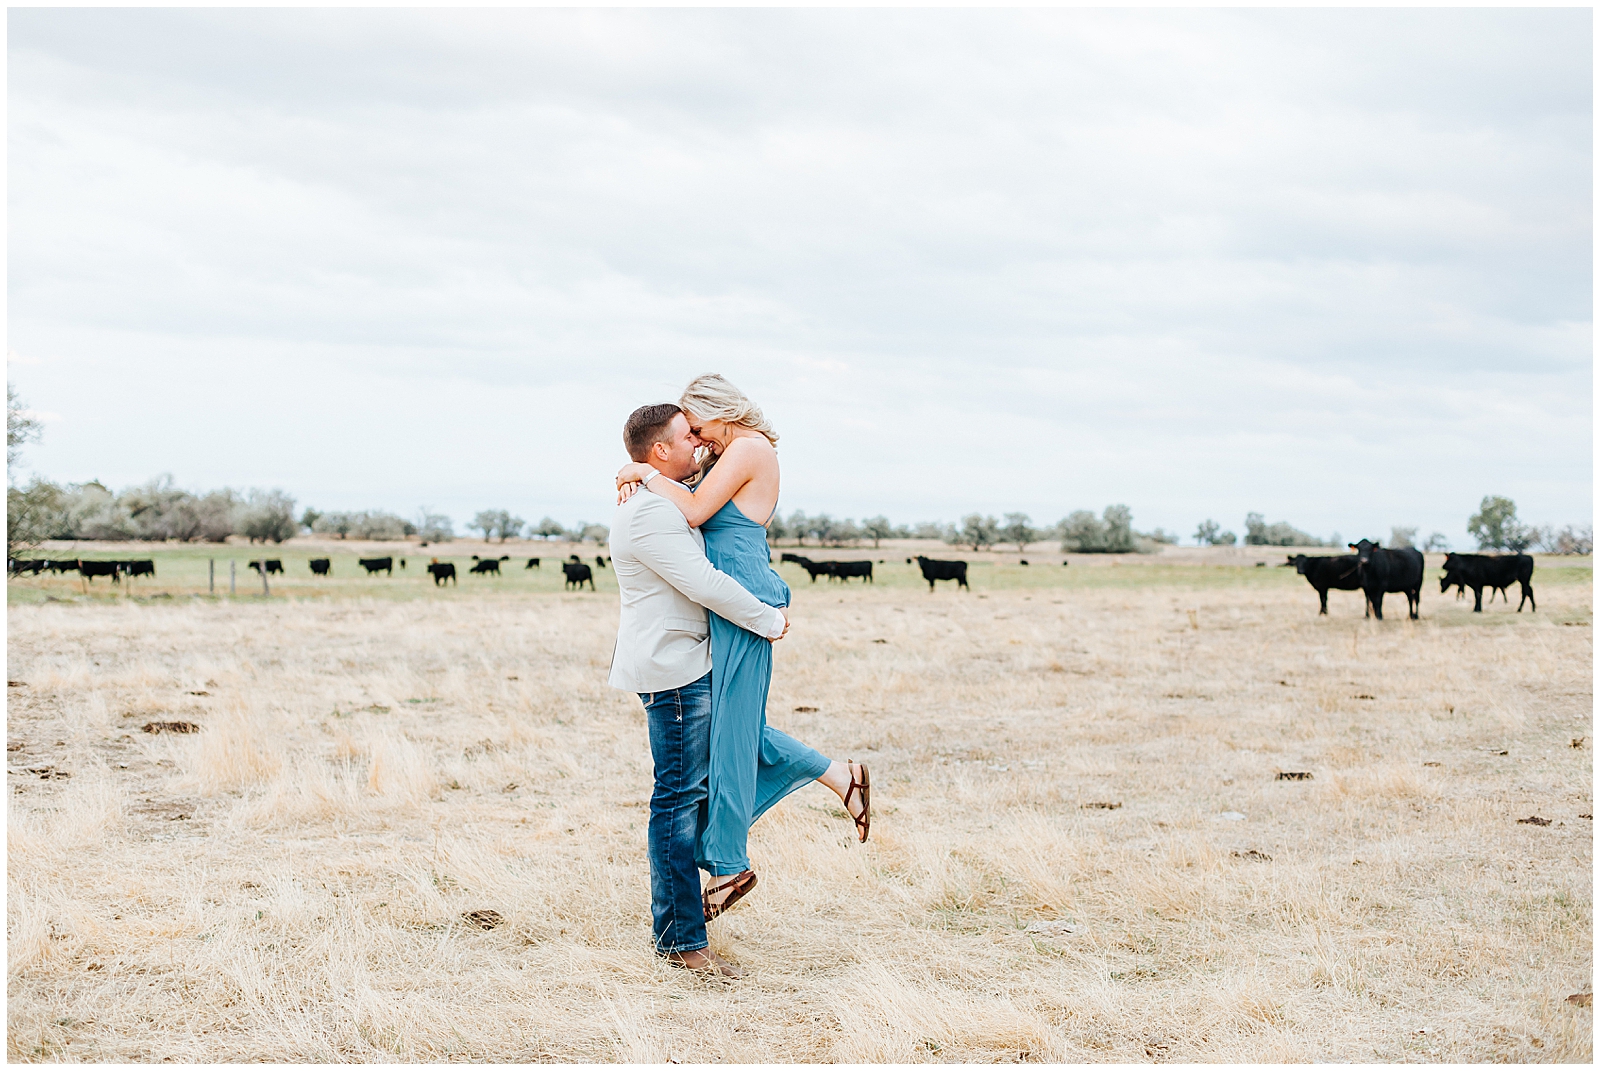 Idaho Engagement Session with Cows